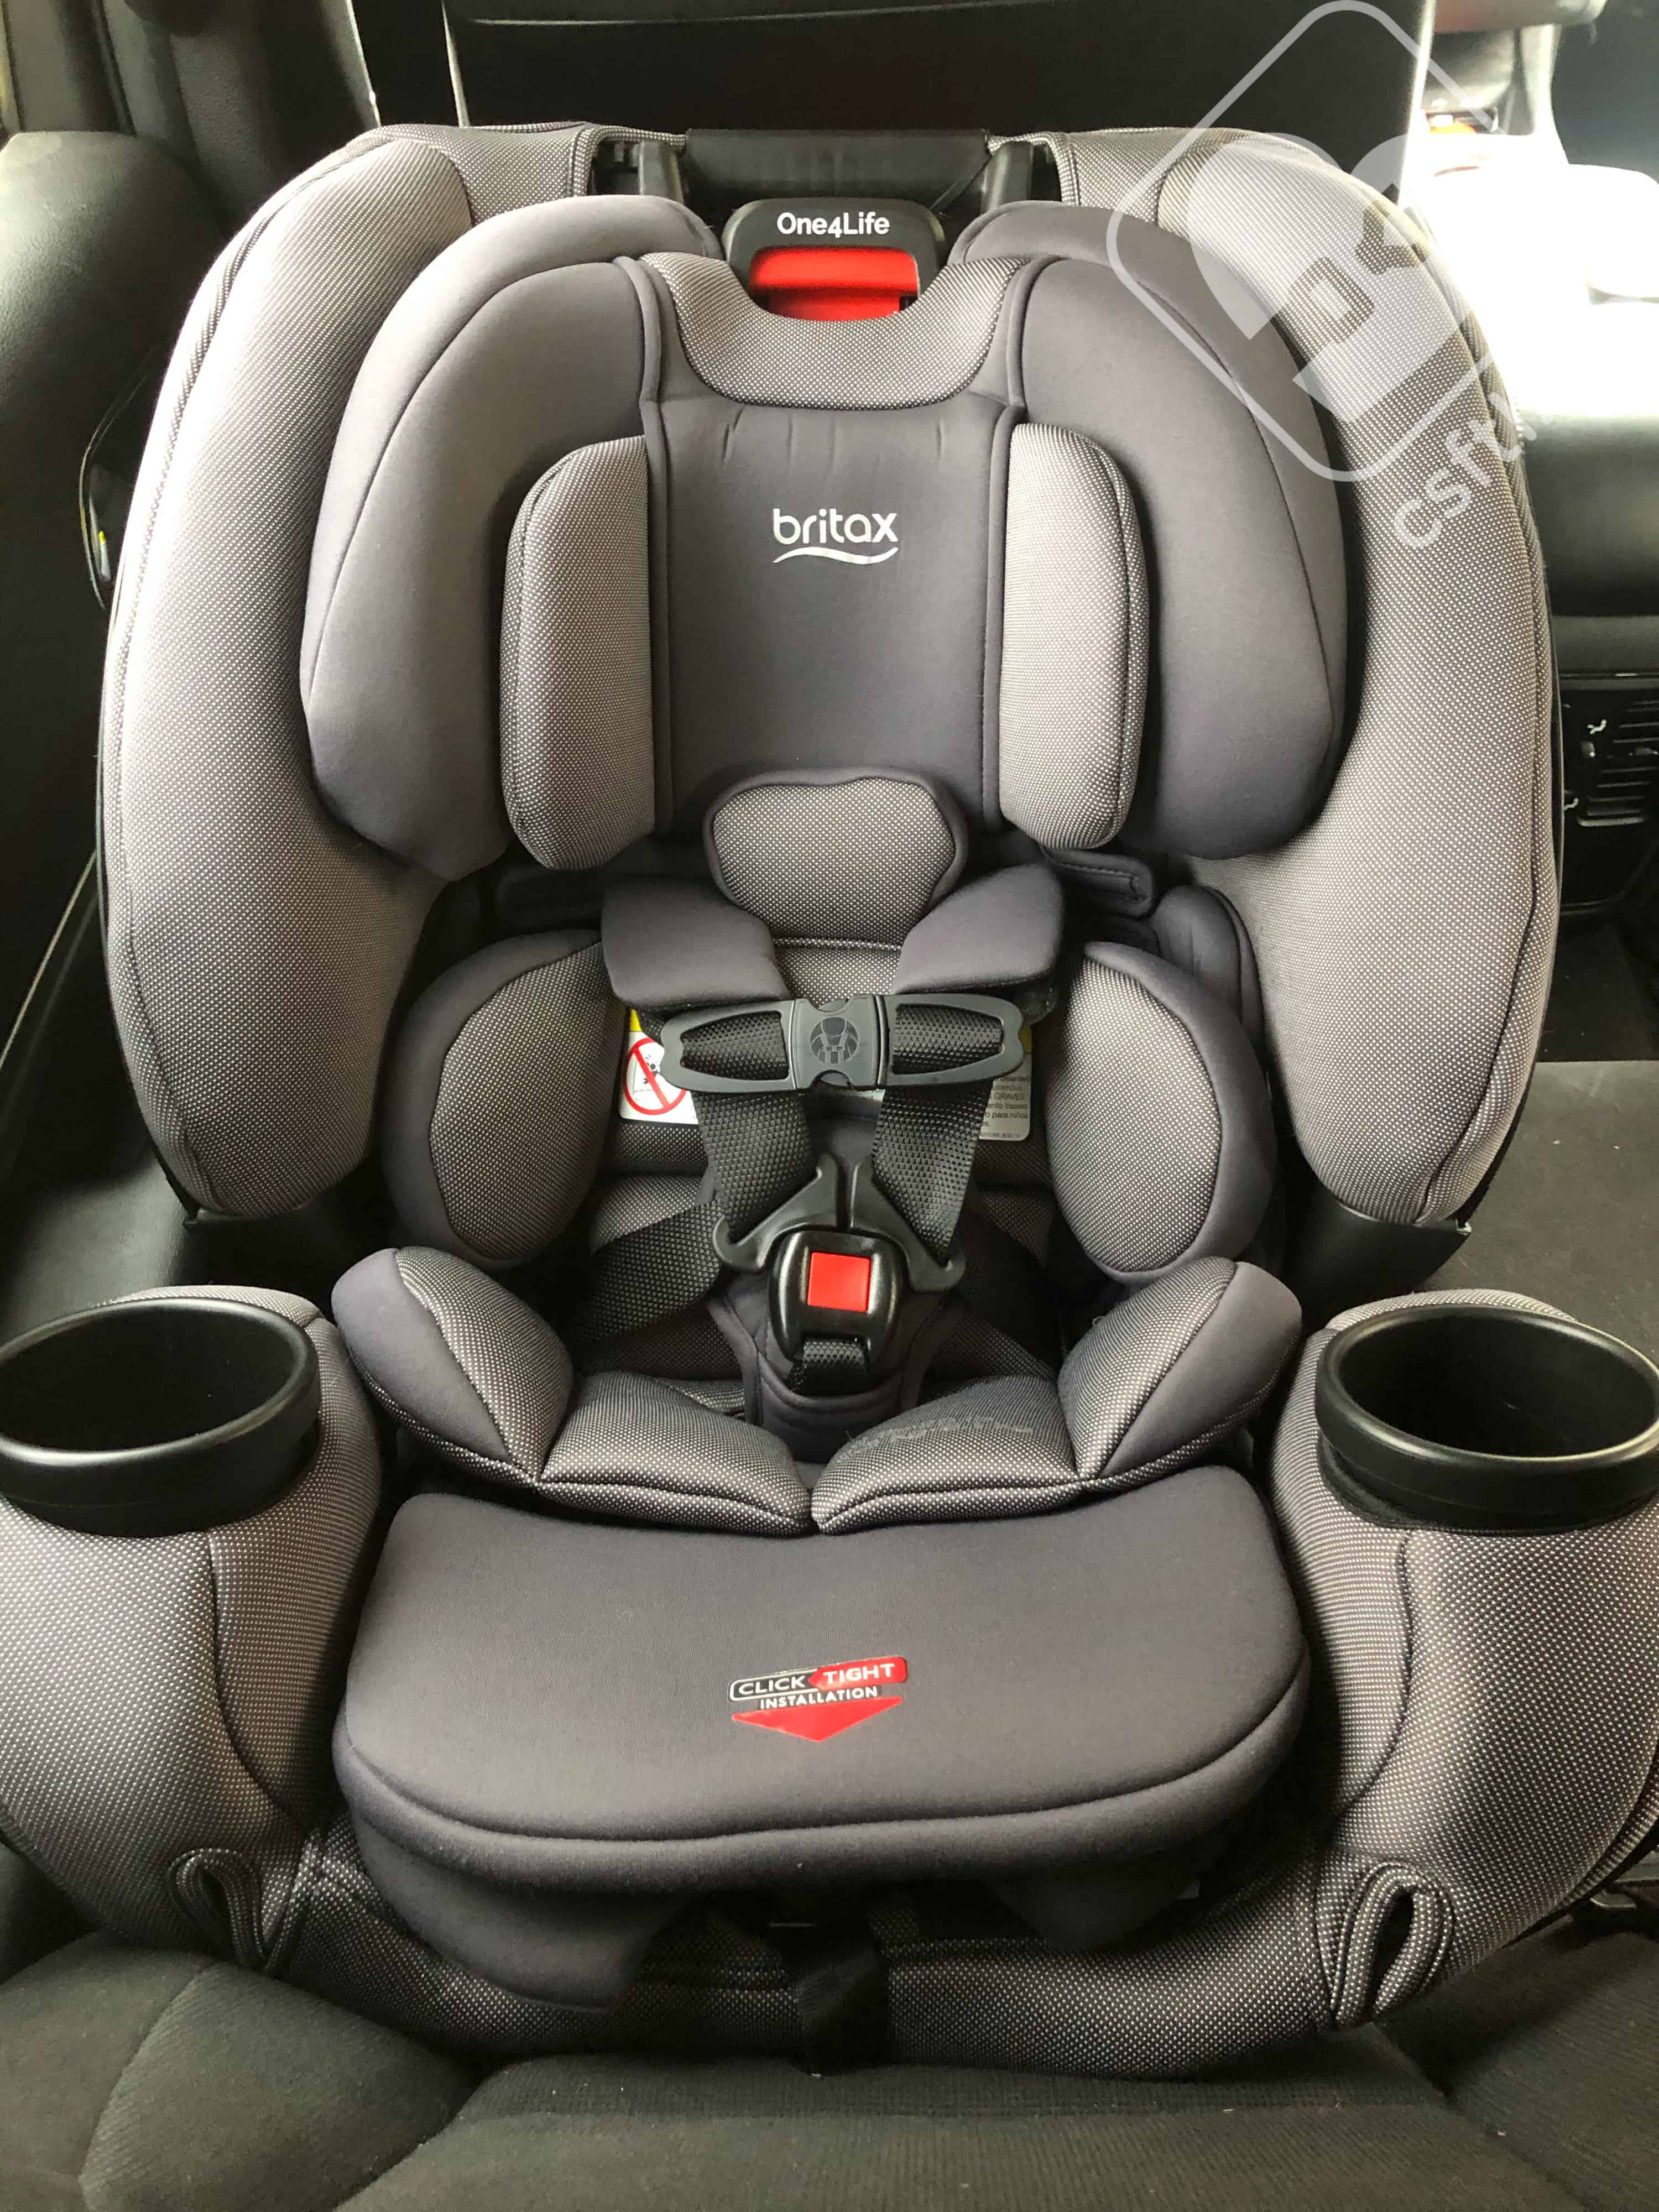 Britax One4life Review United States, How To Remove A Britax Car Seat Cover